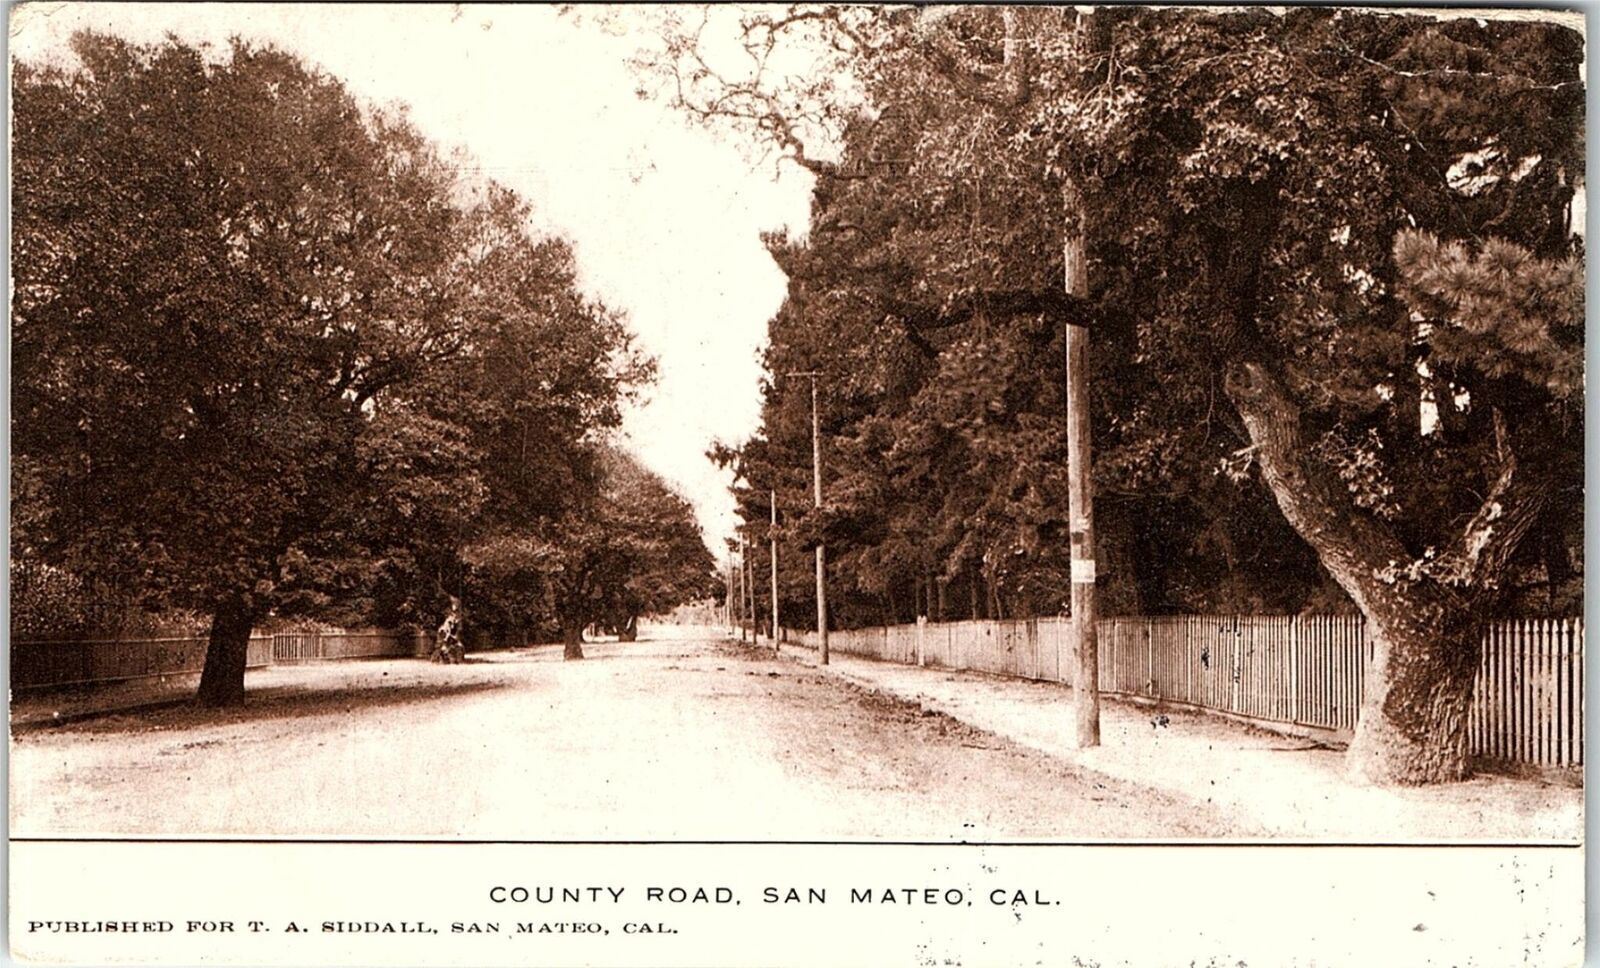 1911 SAN MATEO CALIFORNIA COUNTY ROAD TREE LINED PICKET FENCE POSTCARD 41-304